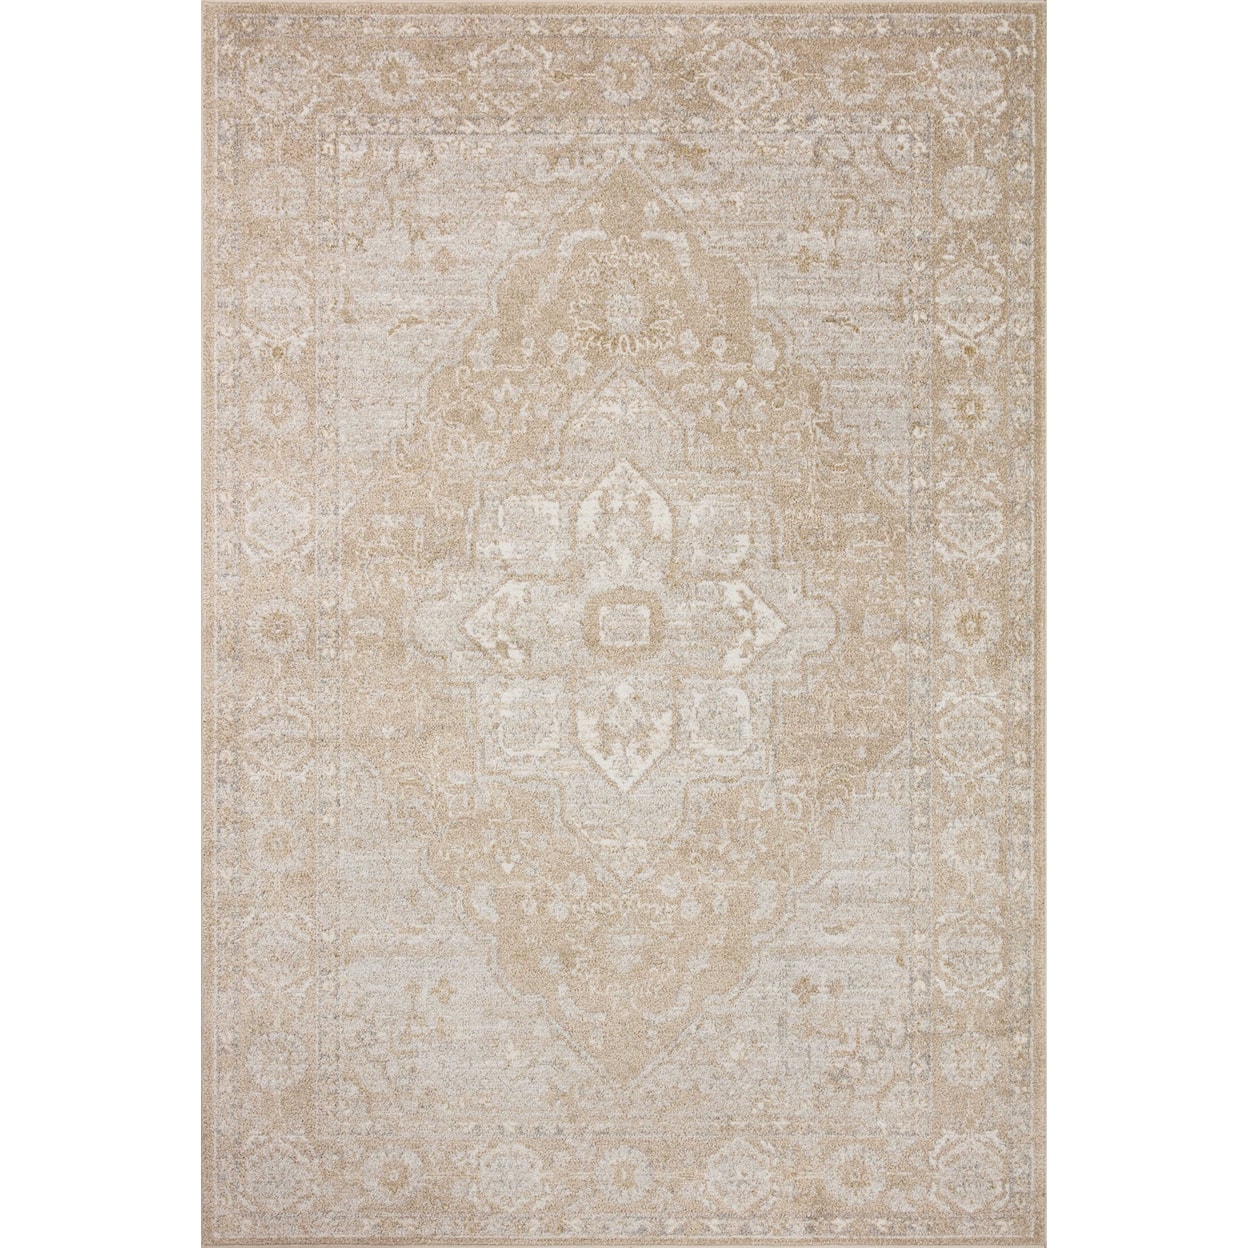 Loloi Rugs Odette 5'3" x 5'3" Round  Rug